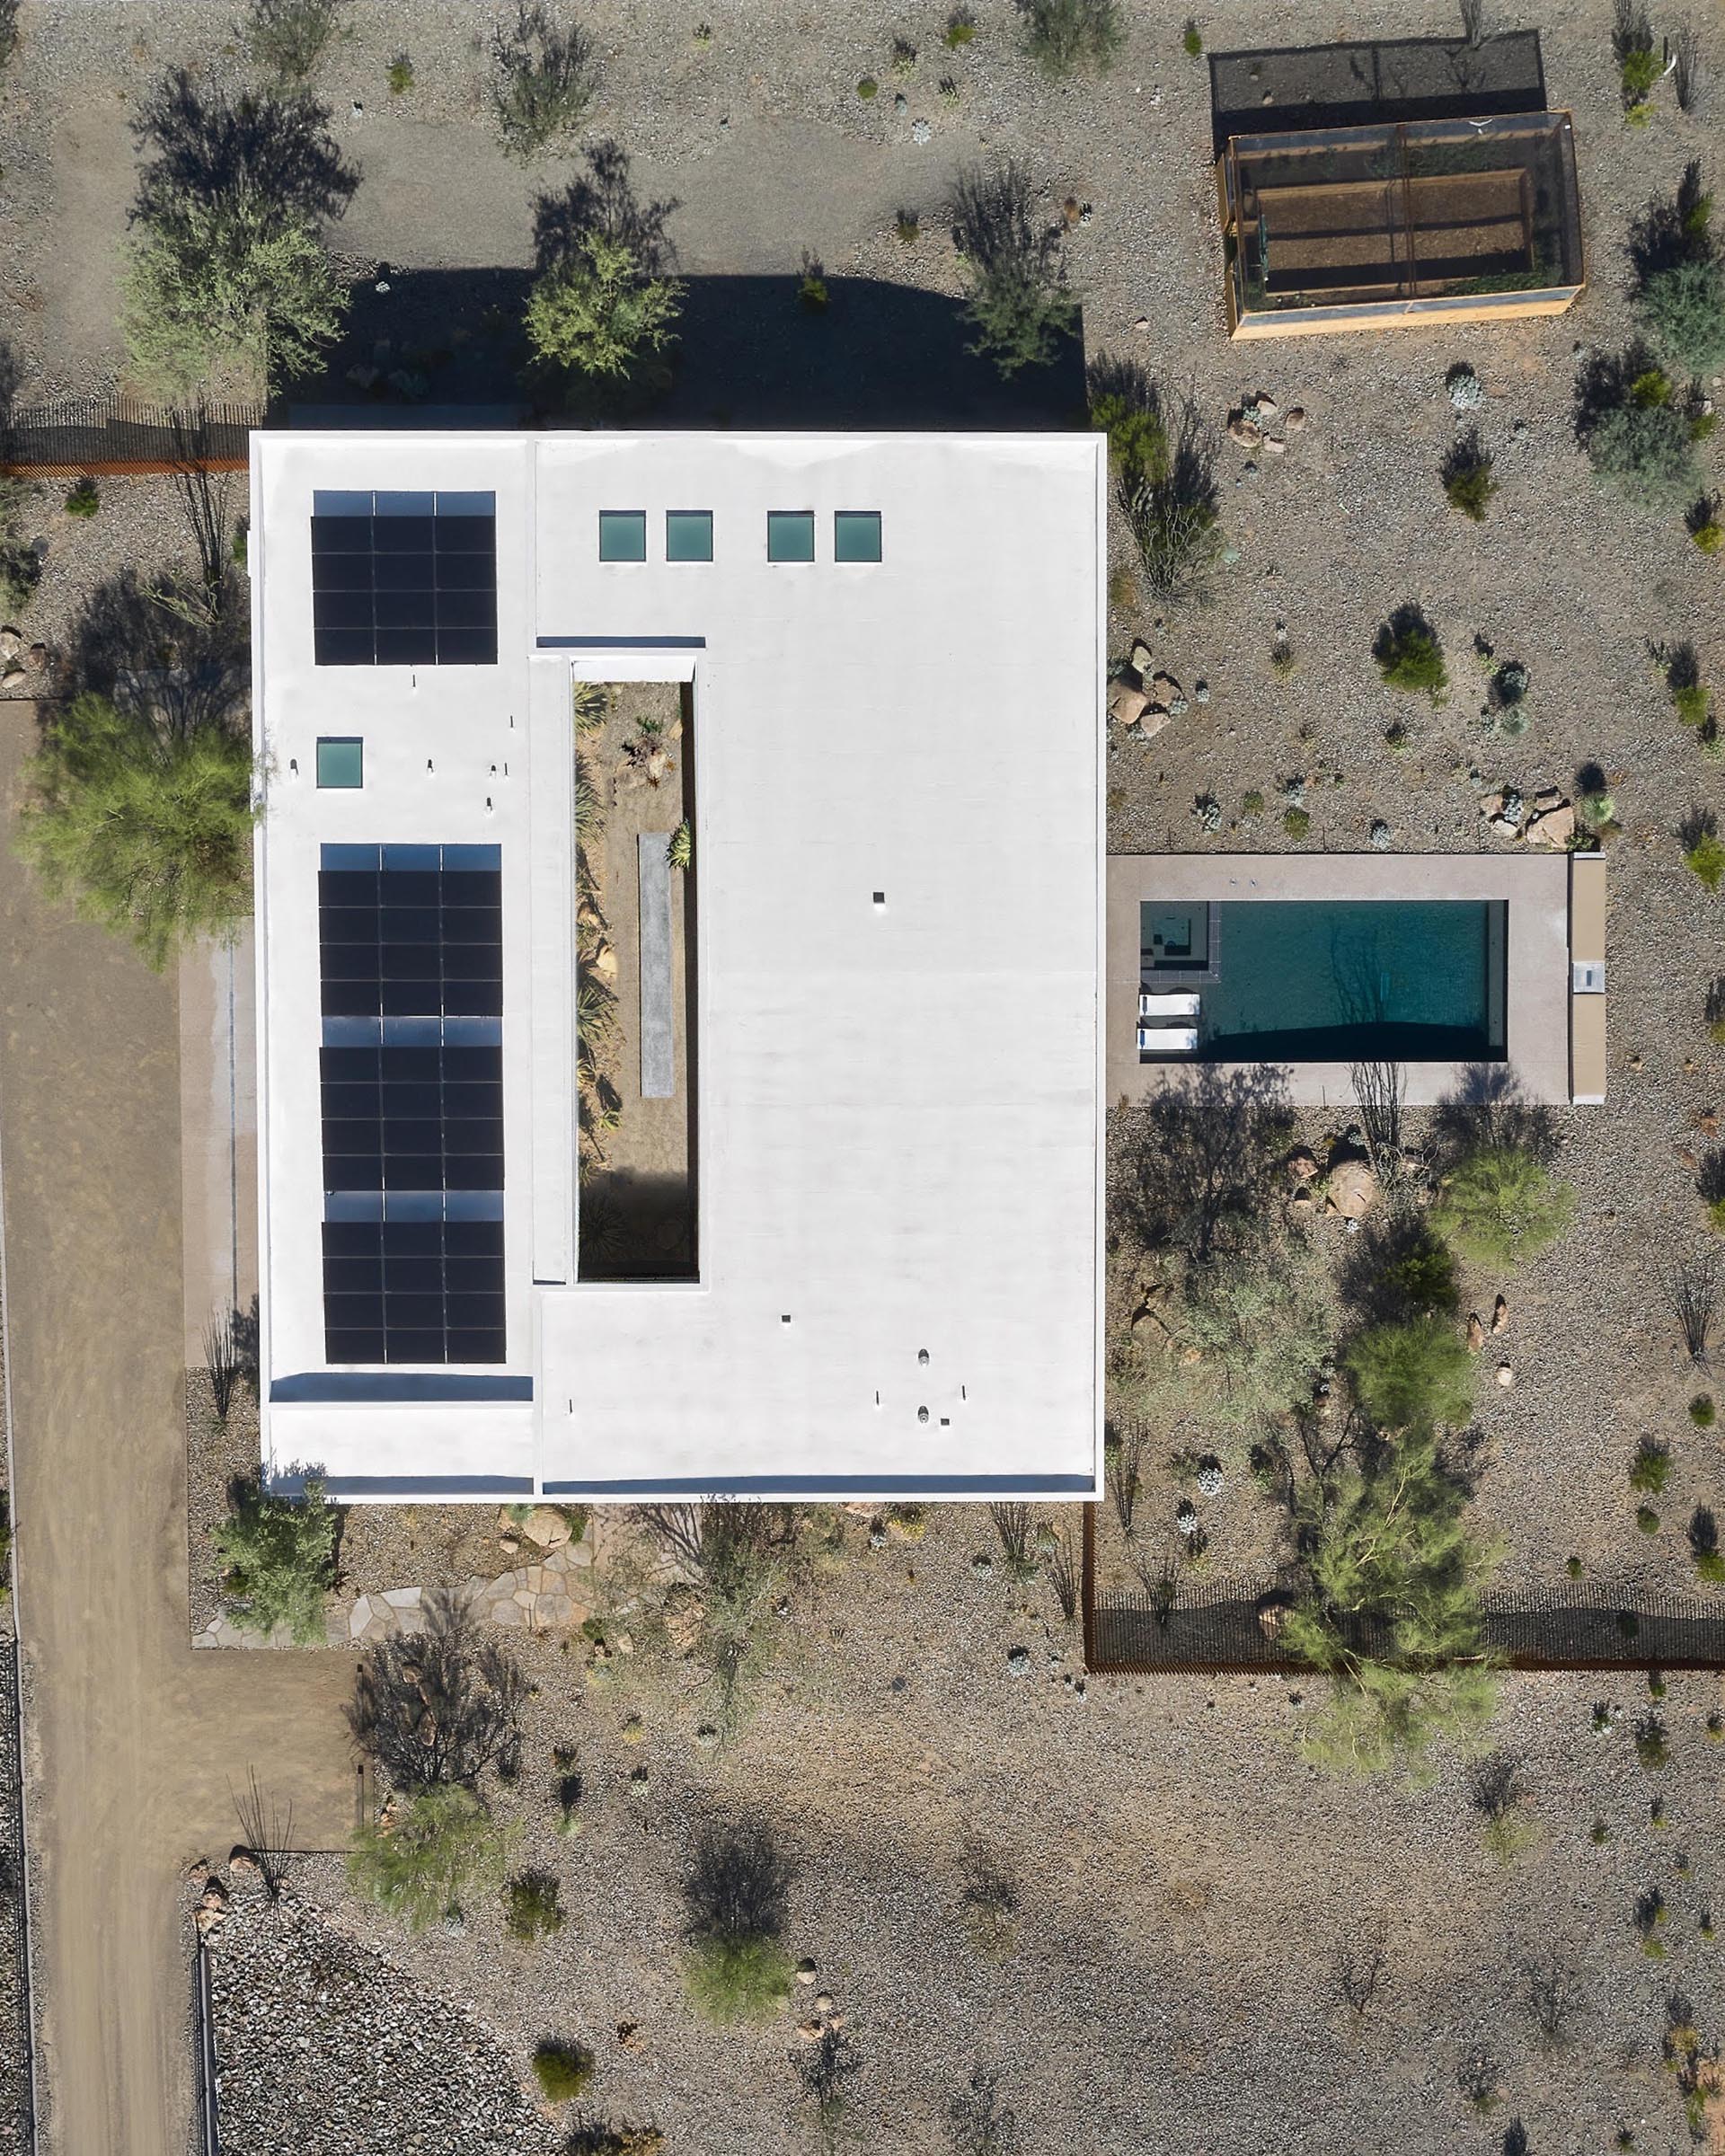 A modern house in the desert with a central courtyard, a swimming pool, and solar on the roof.